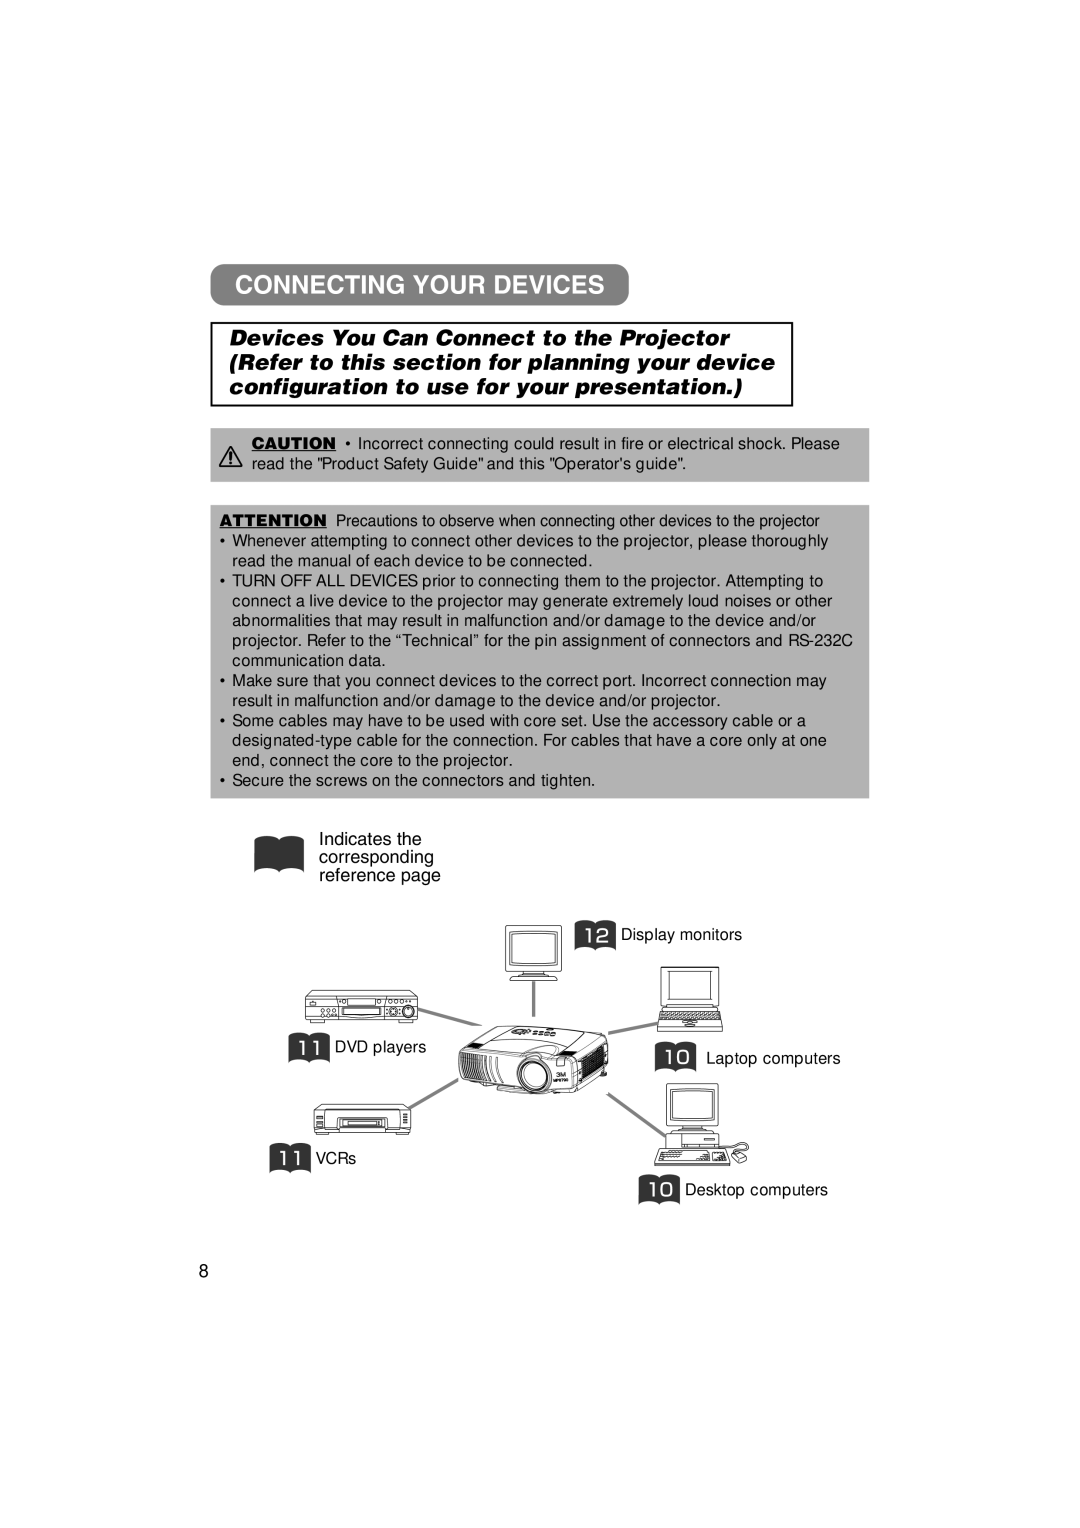 3M MP7650, MP7750 manual Connecting Your Devices, Indicates the corresponding reference page 